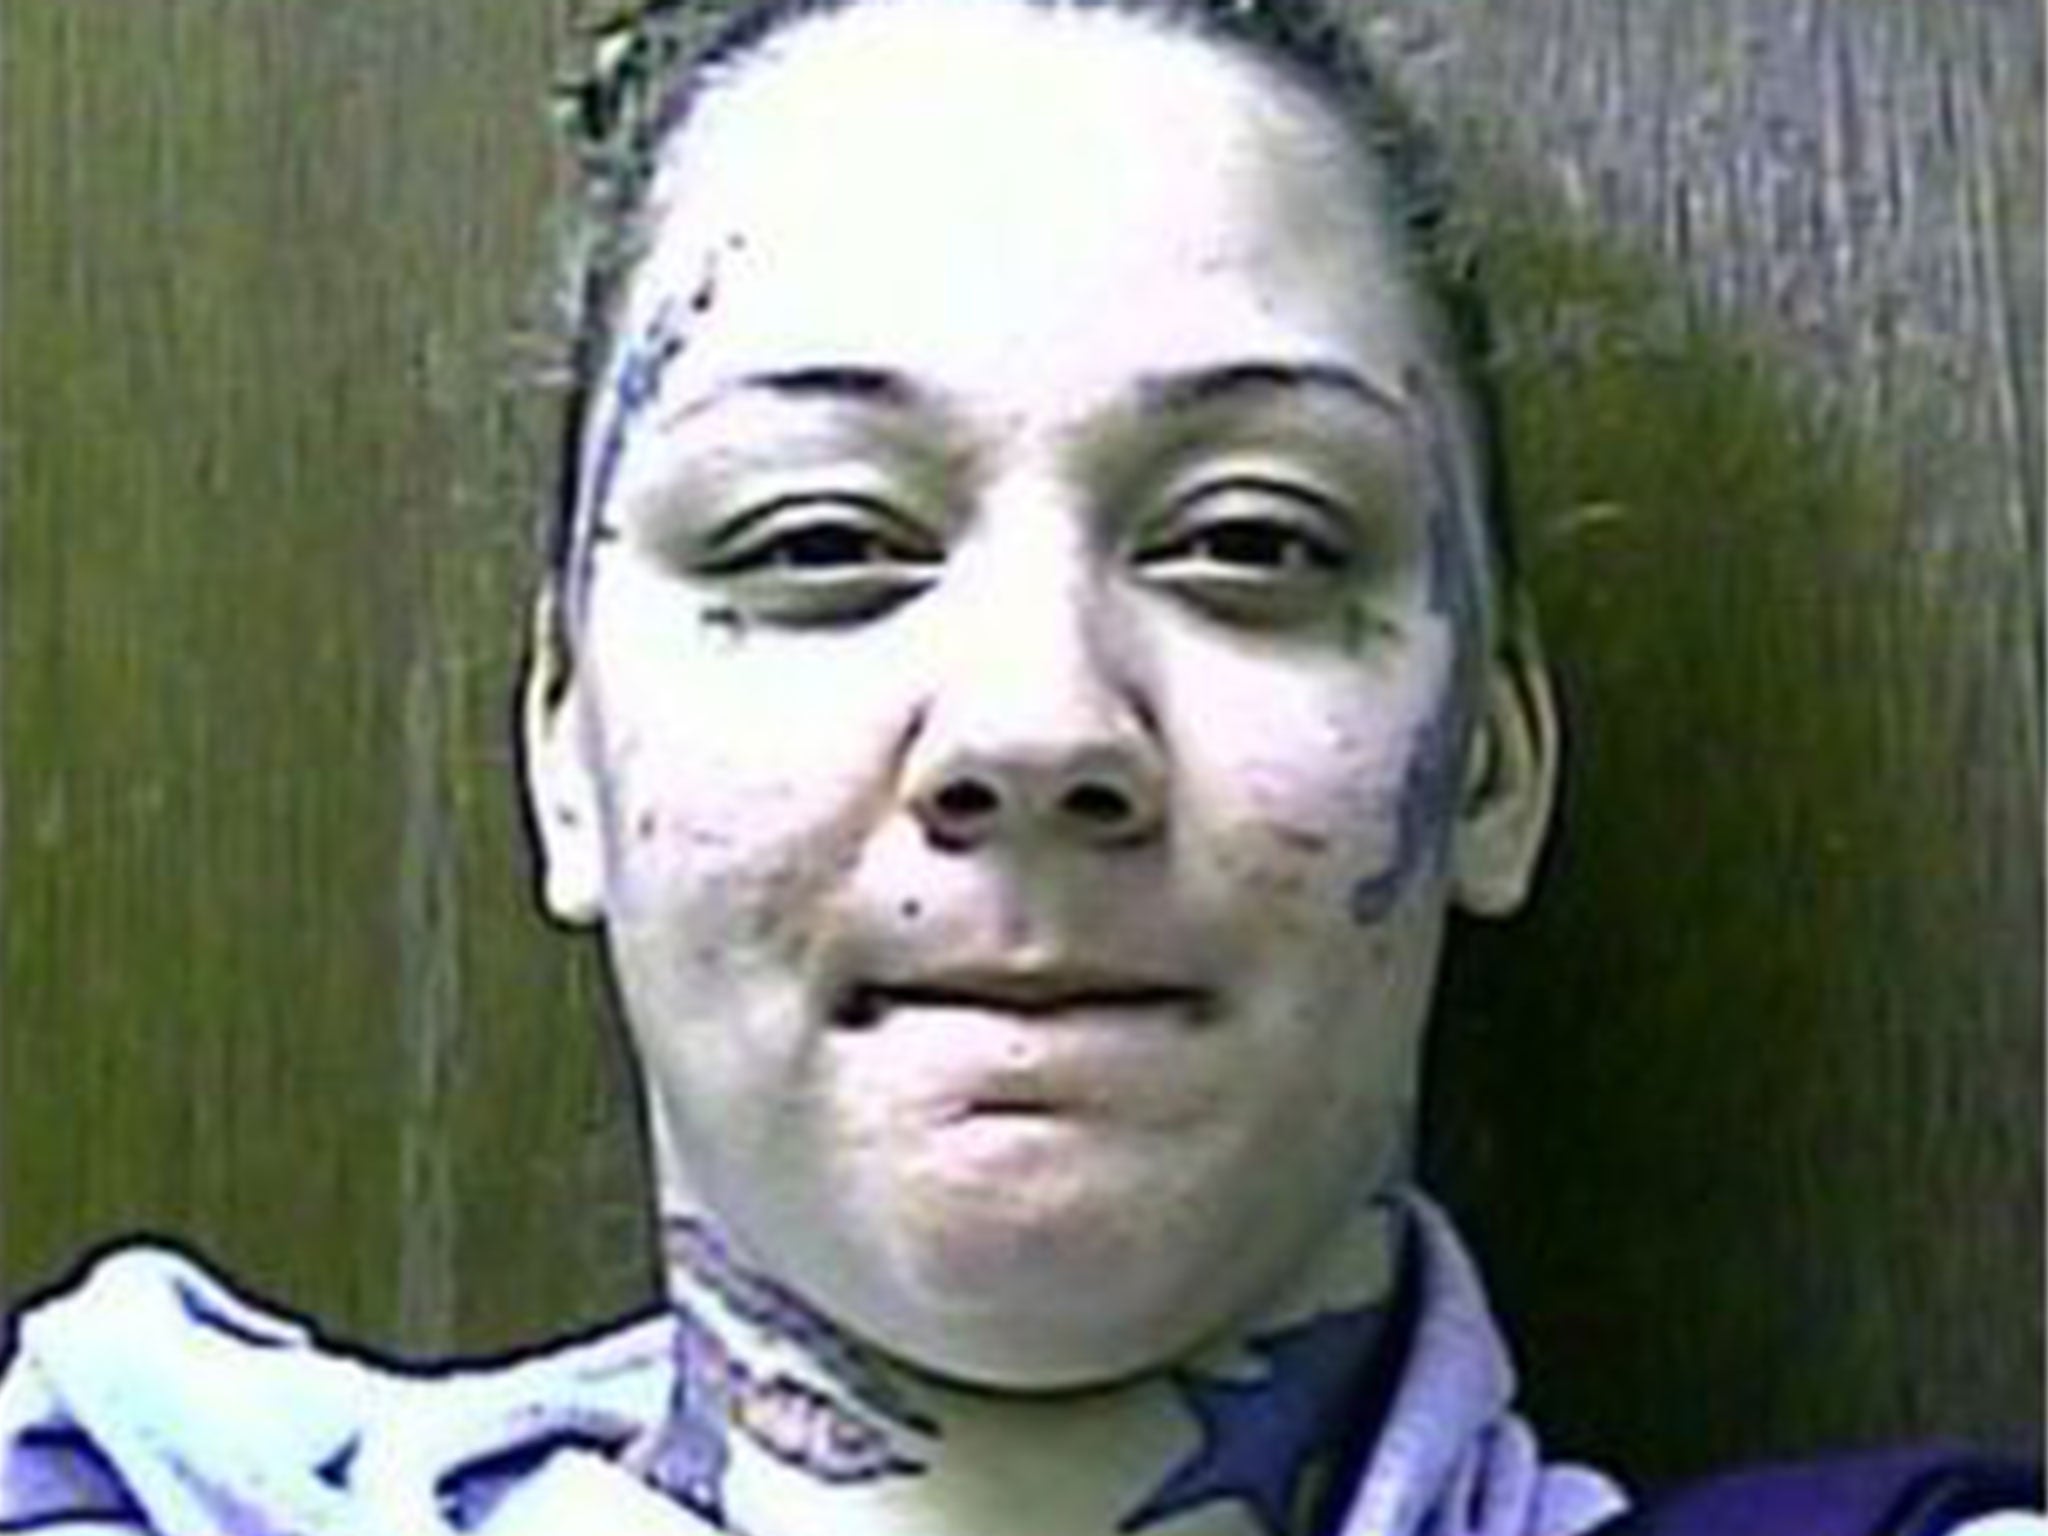 Amanda Zolicoffer, 27, pleaded guilty to a charge of lewdness